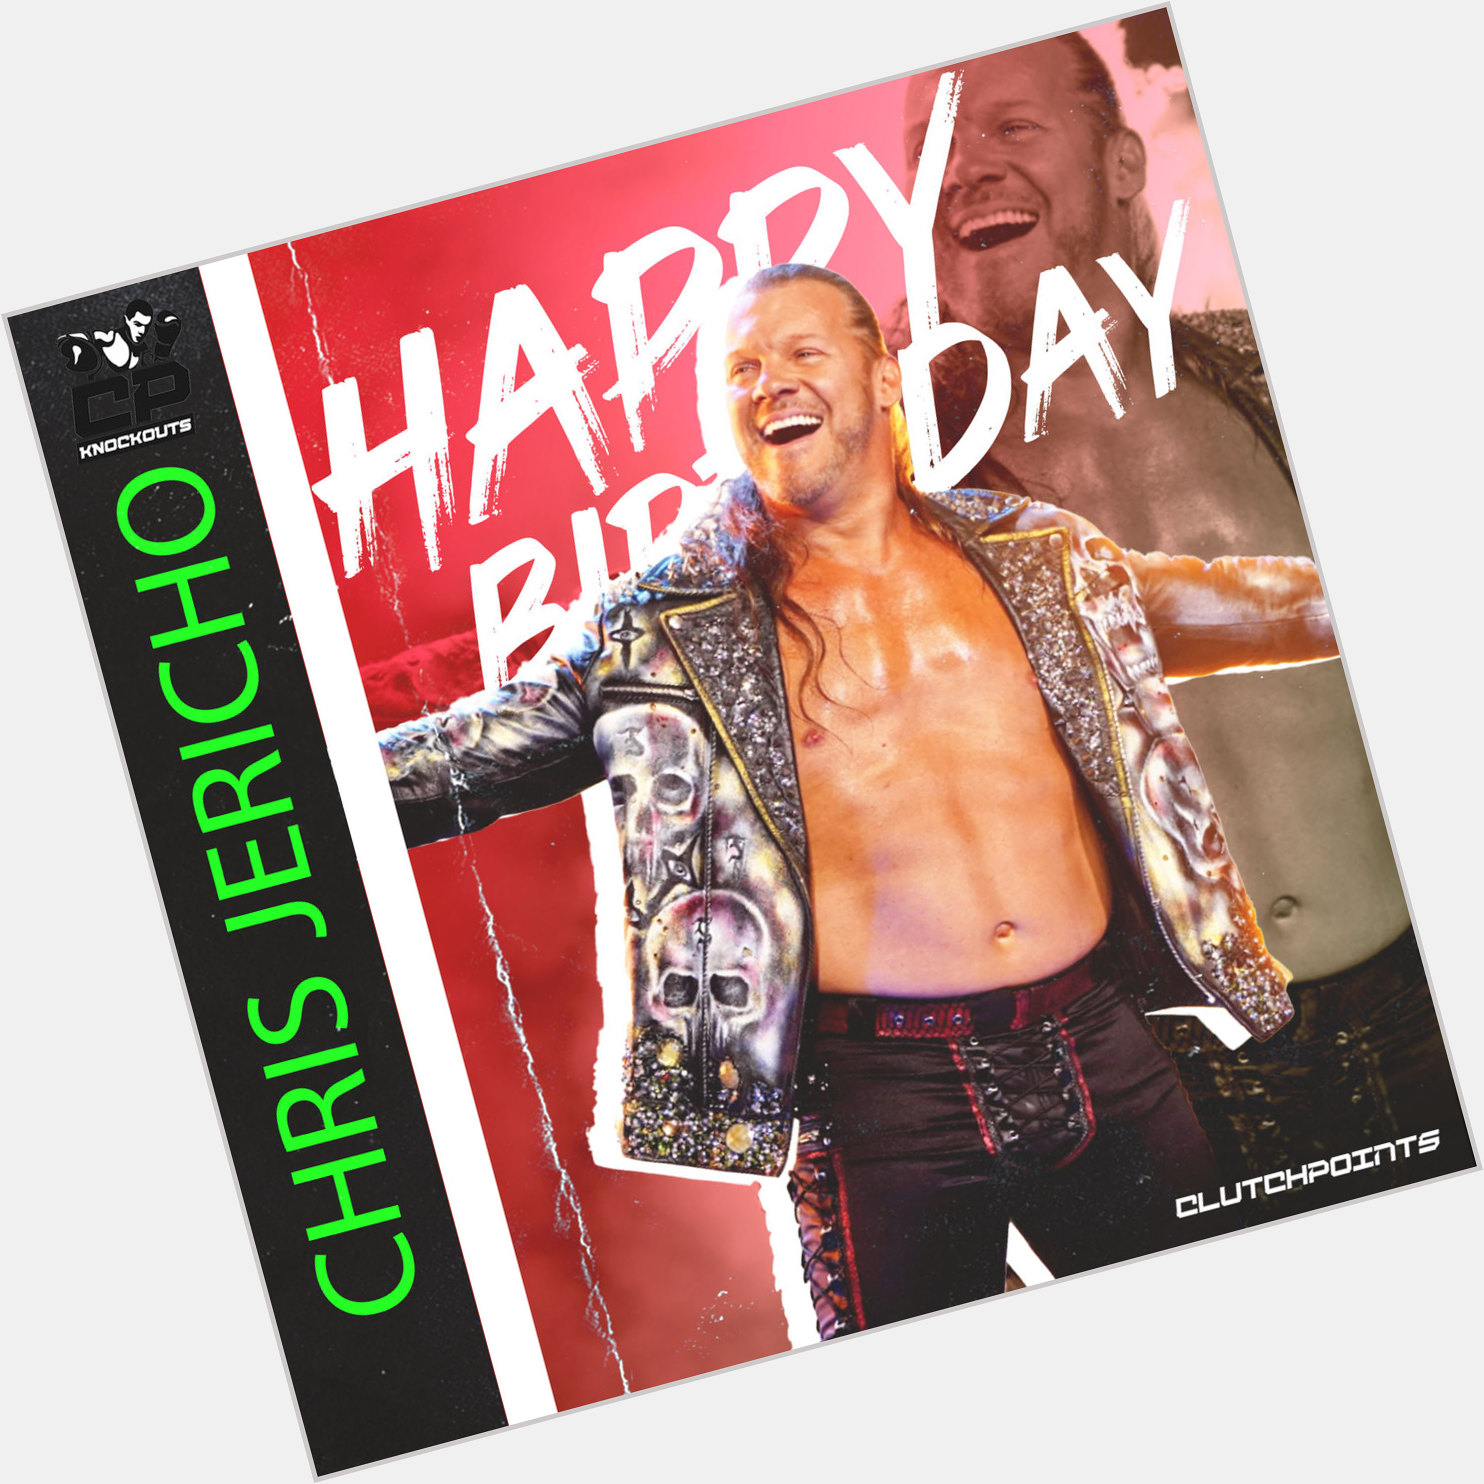 Let\s all wish Chris Jericho a happy 51st birthday! 